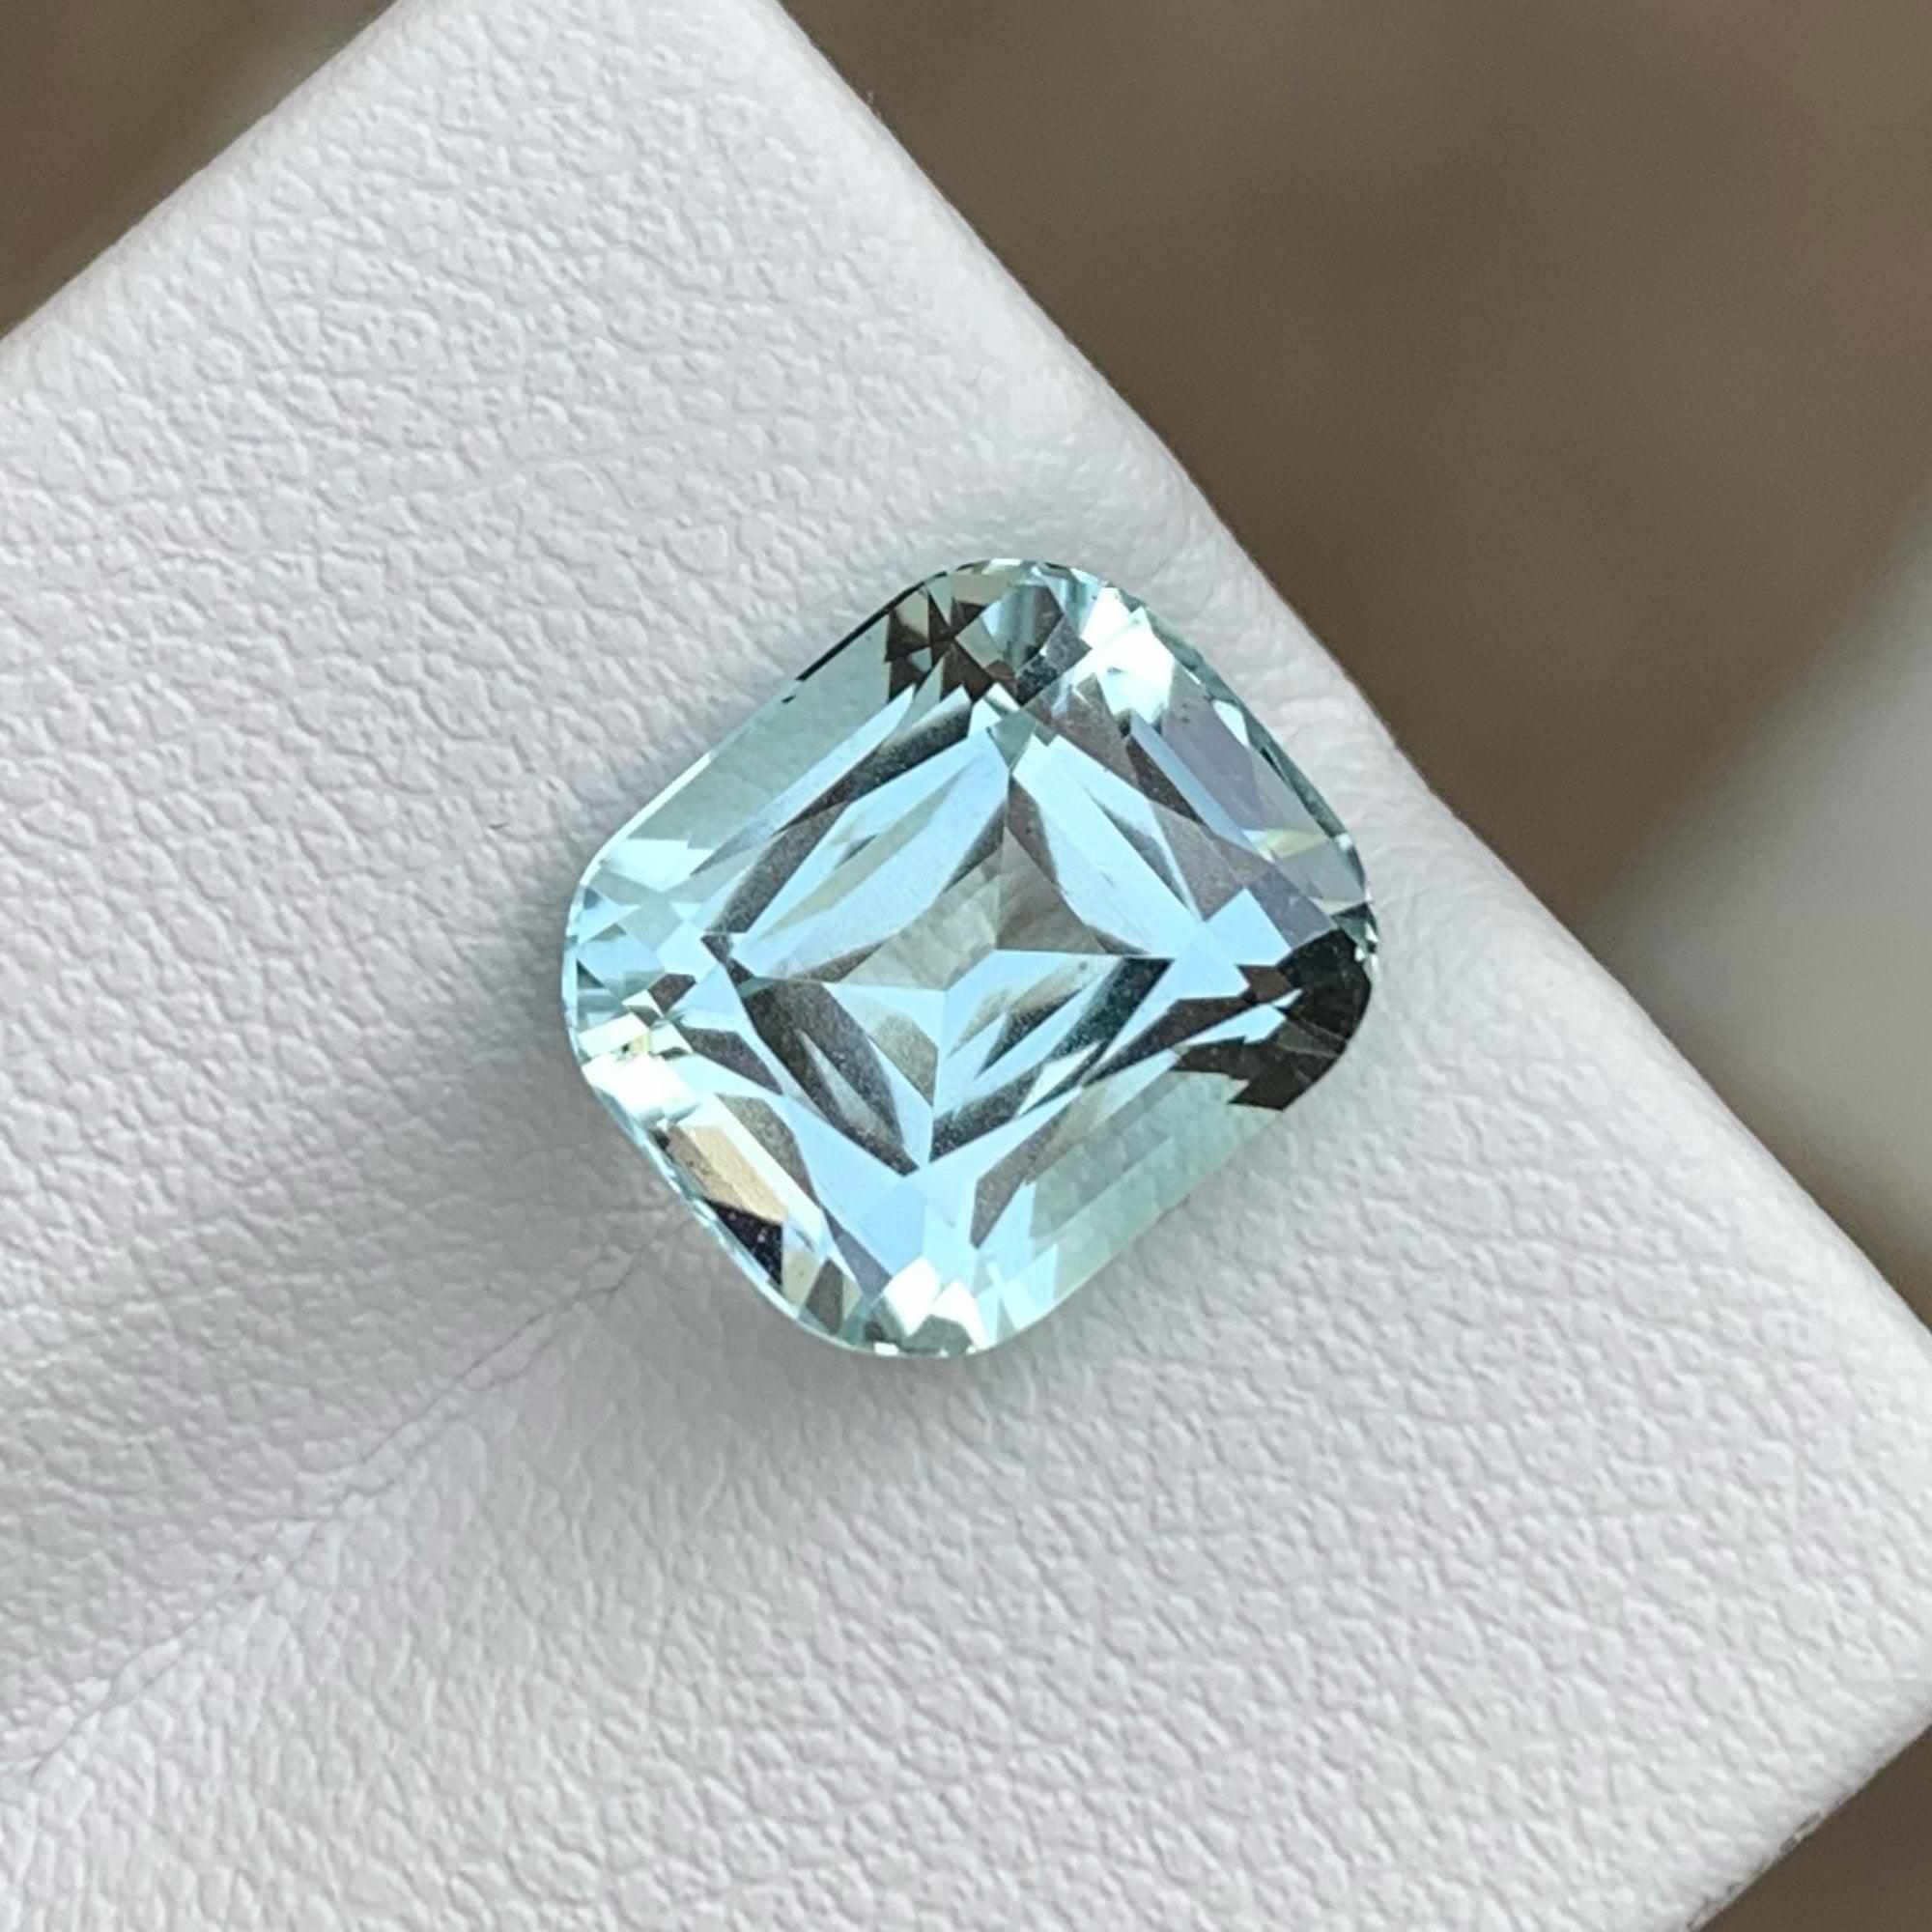 Natural Aquamarine stone, available for sale at wholesale price natural high quality 4.80 Carats Loupe Clean Clarity Loose Aquamarine from Pakistan.

Product Information:
GEMSTONE NAME:	Gorgeous Light Blue Aquamarine Gemstone
WEIGHT:	4.80